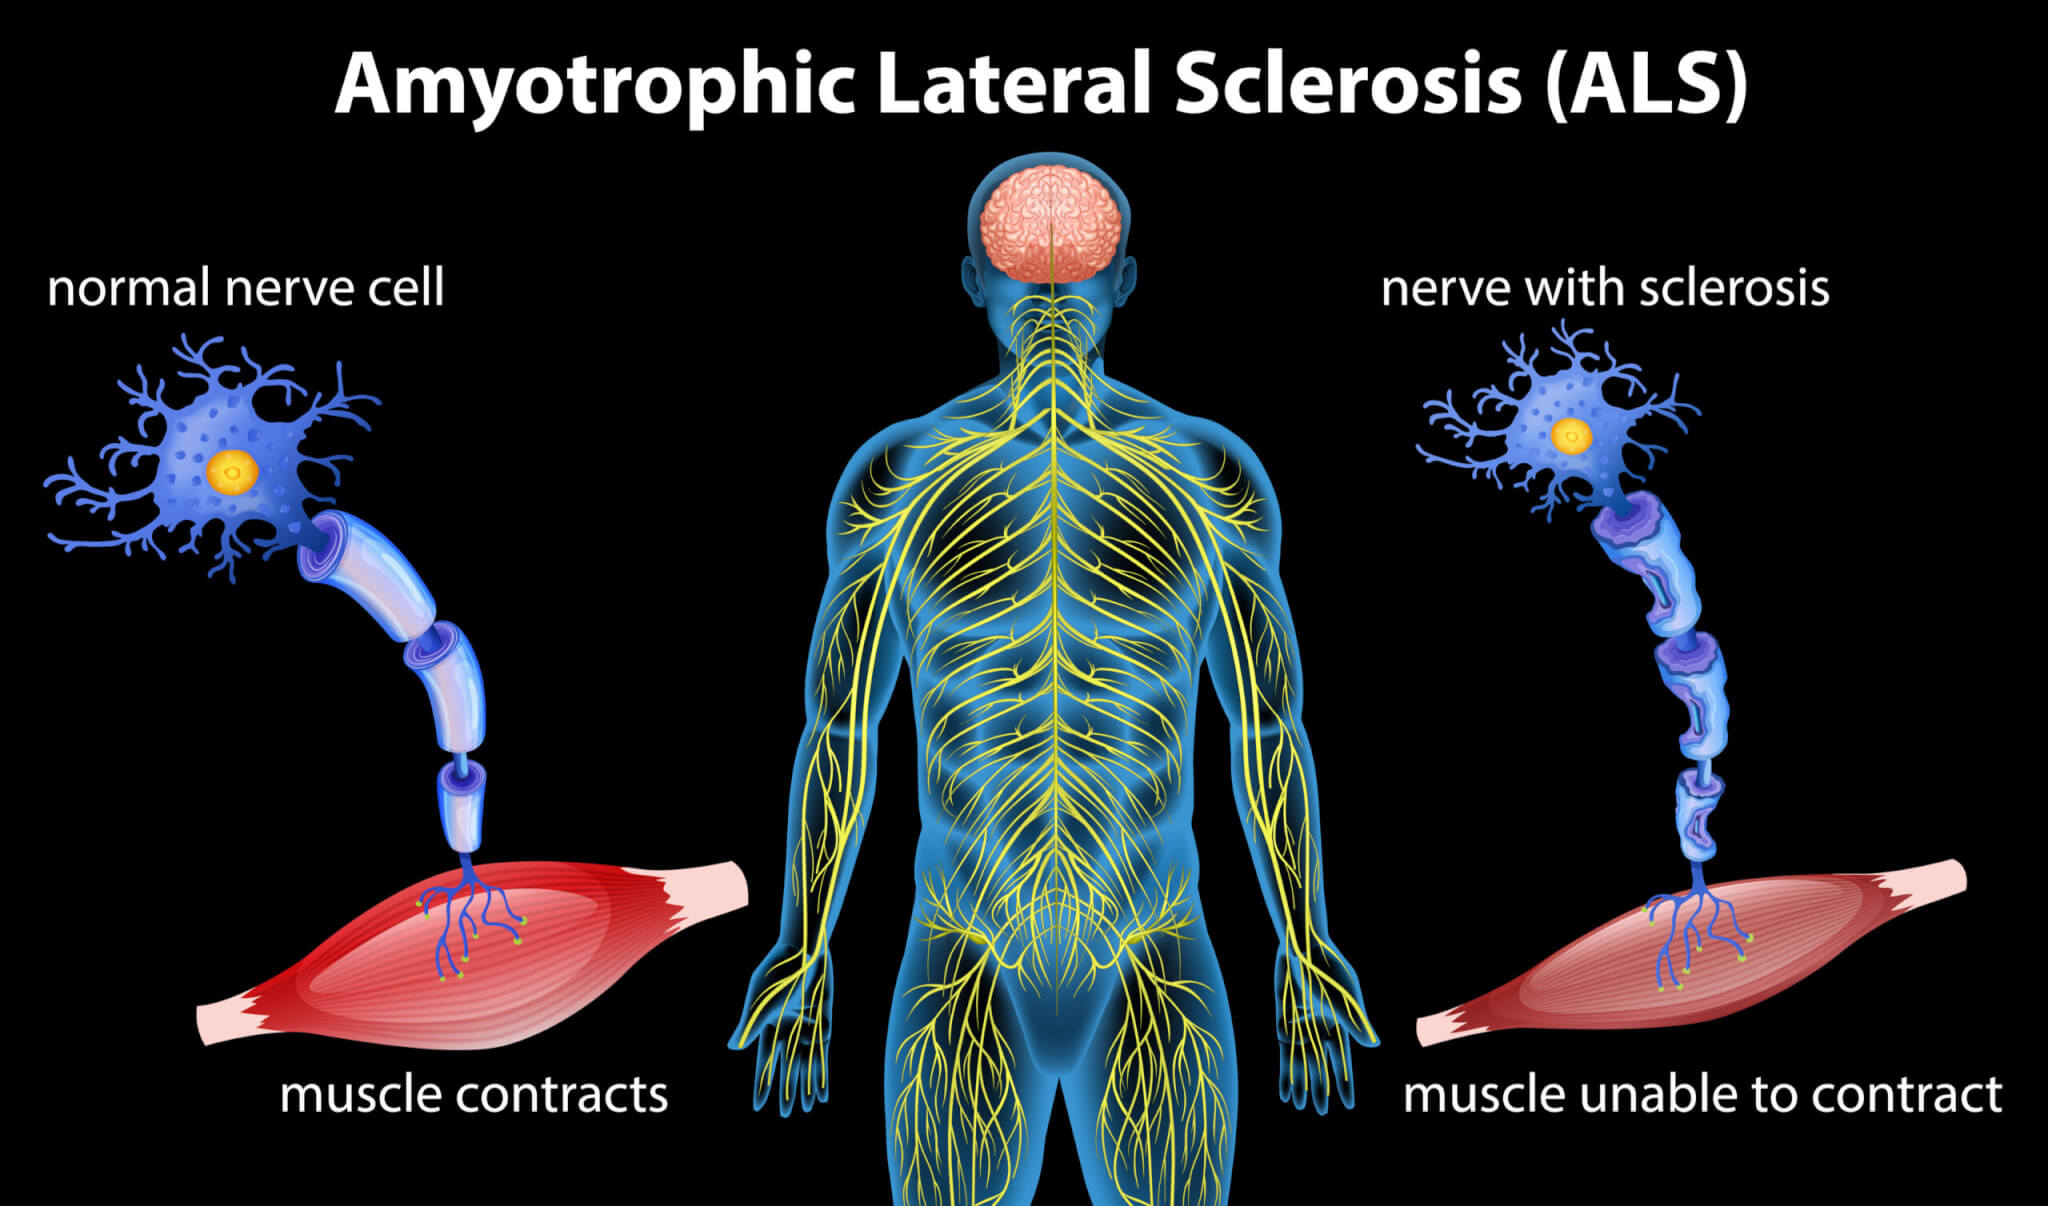 Anatomy of amyotrophic lateral sclerosis